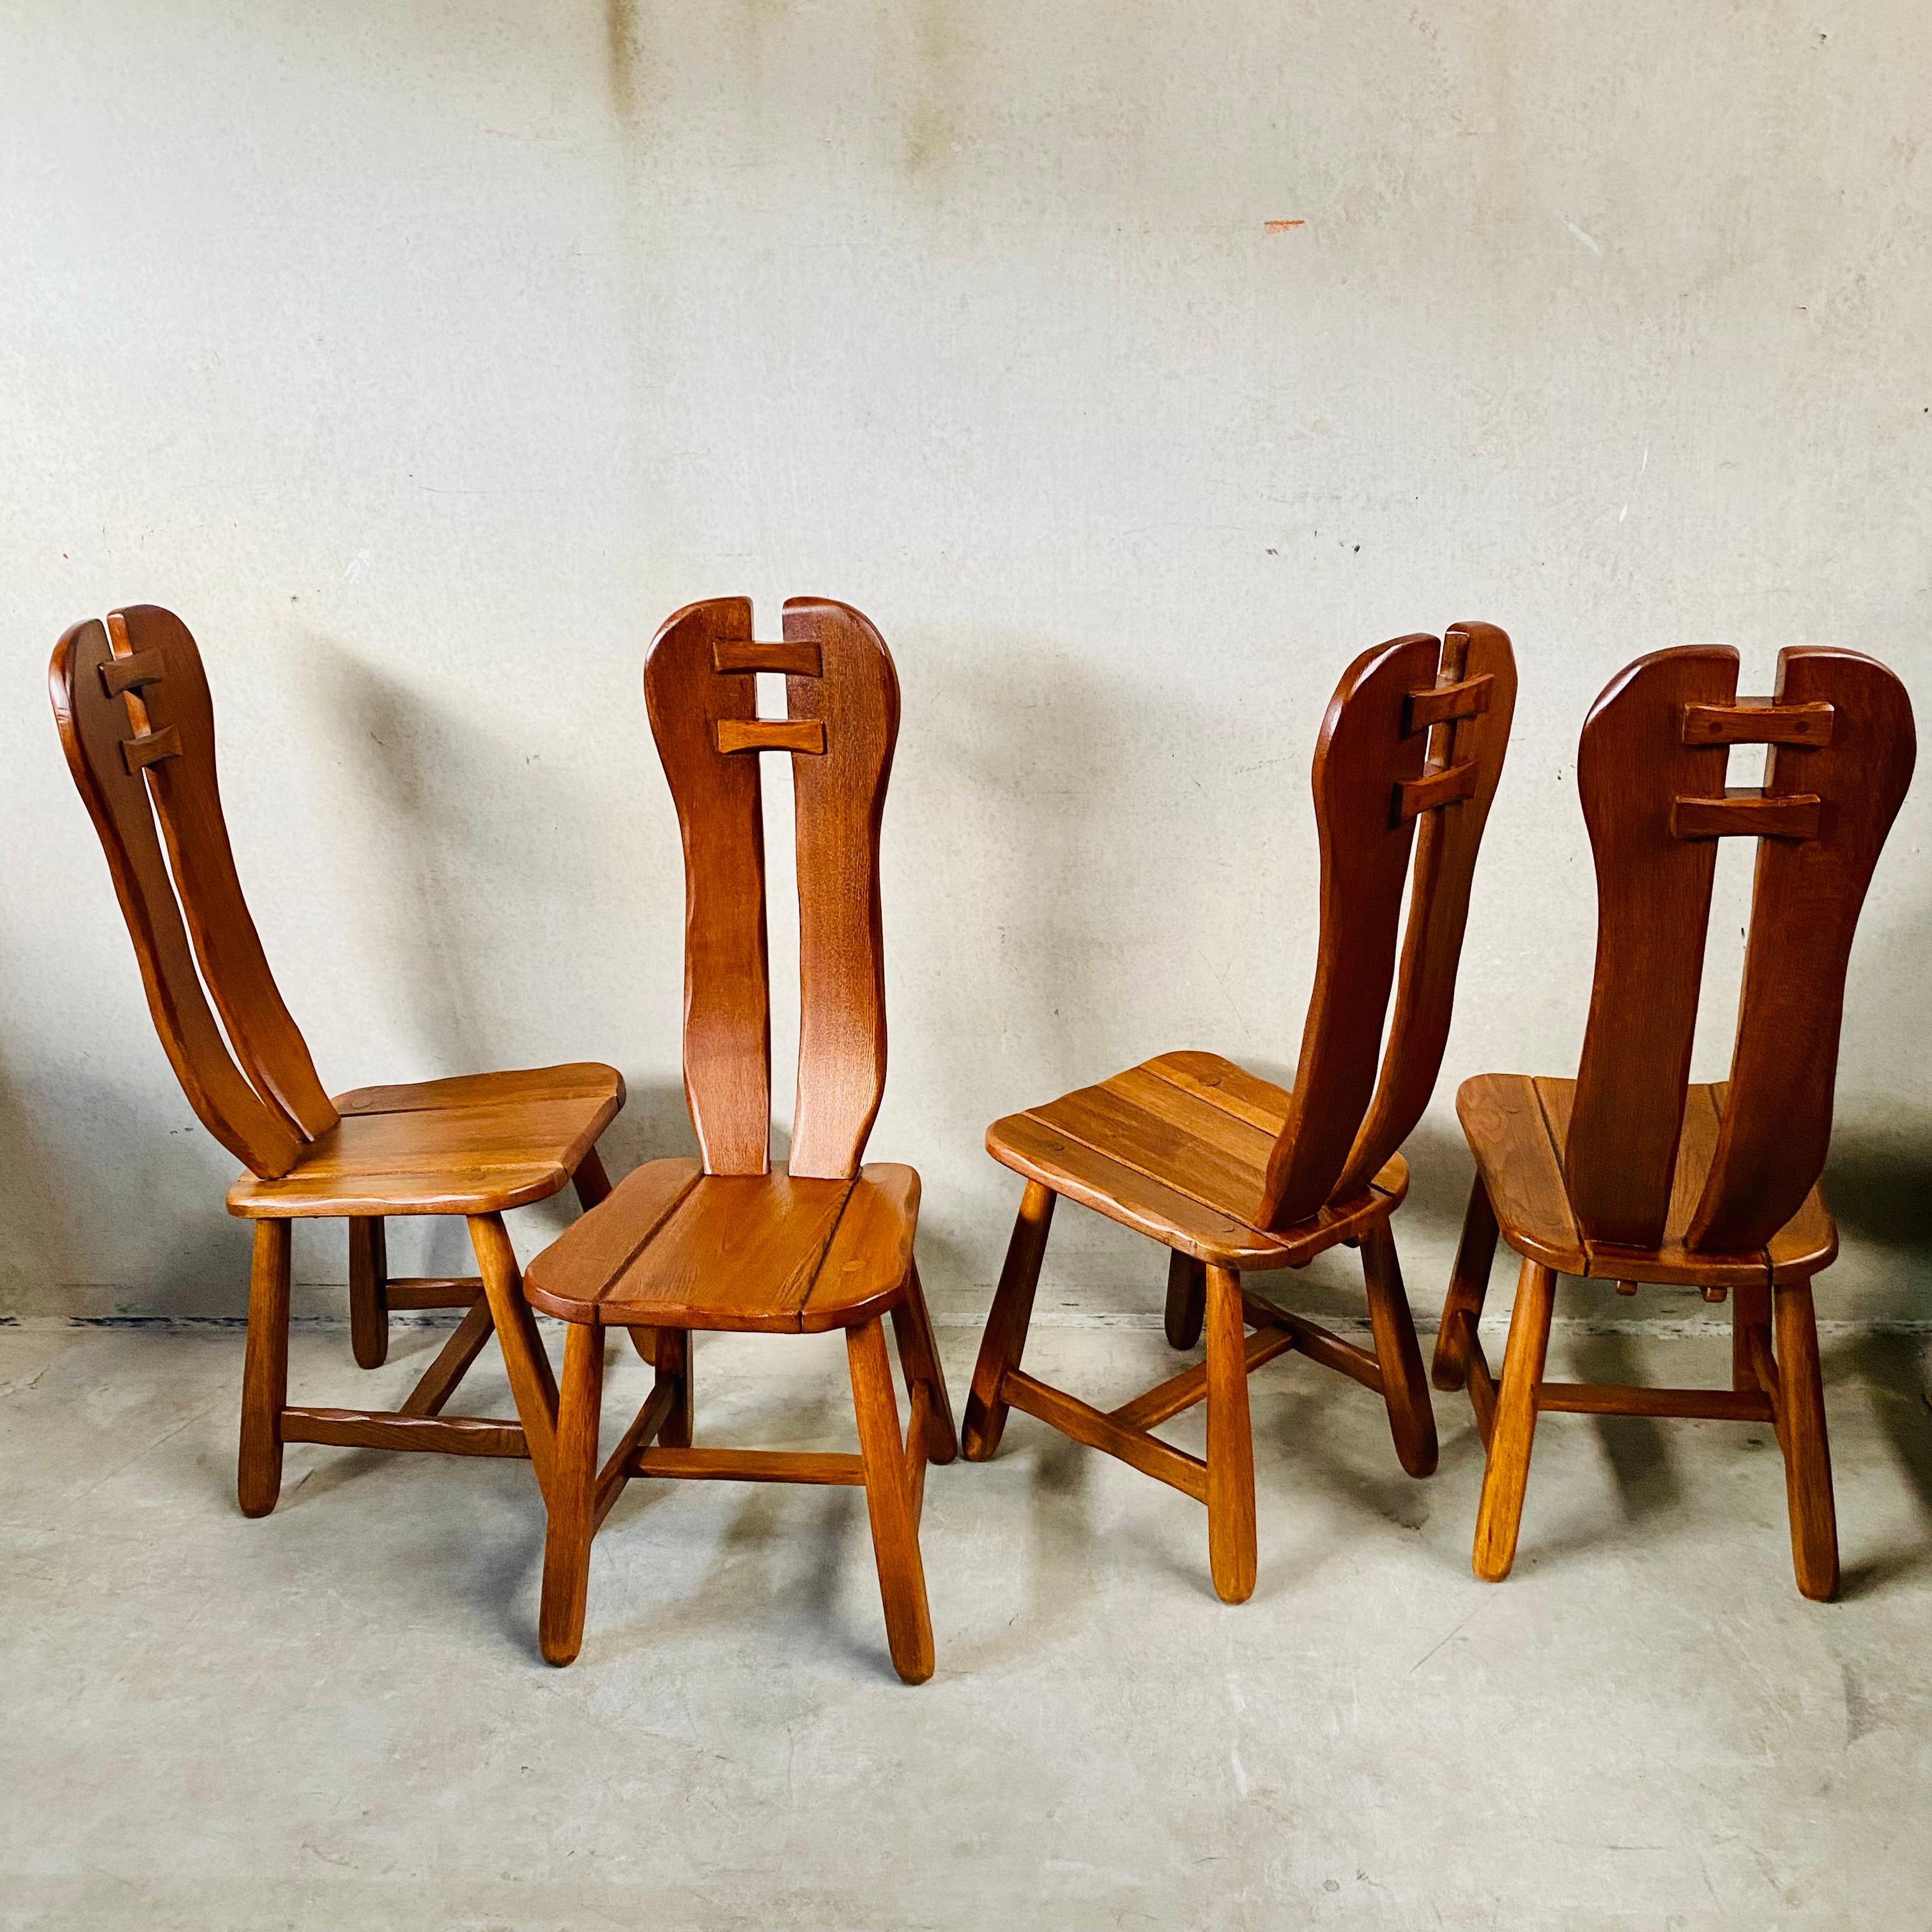 Hand-Carved Brutalist Solid Oak Art Dining Chairs by 